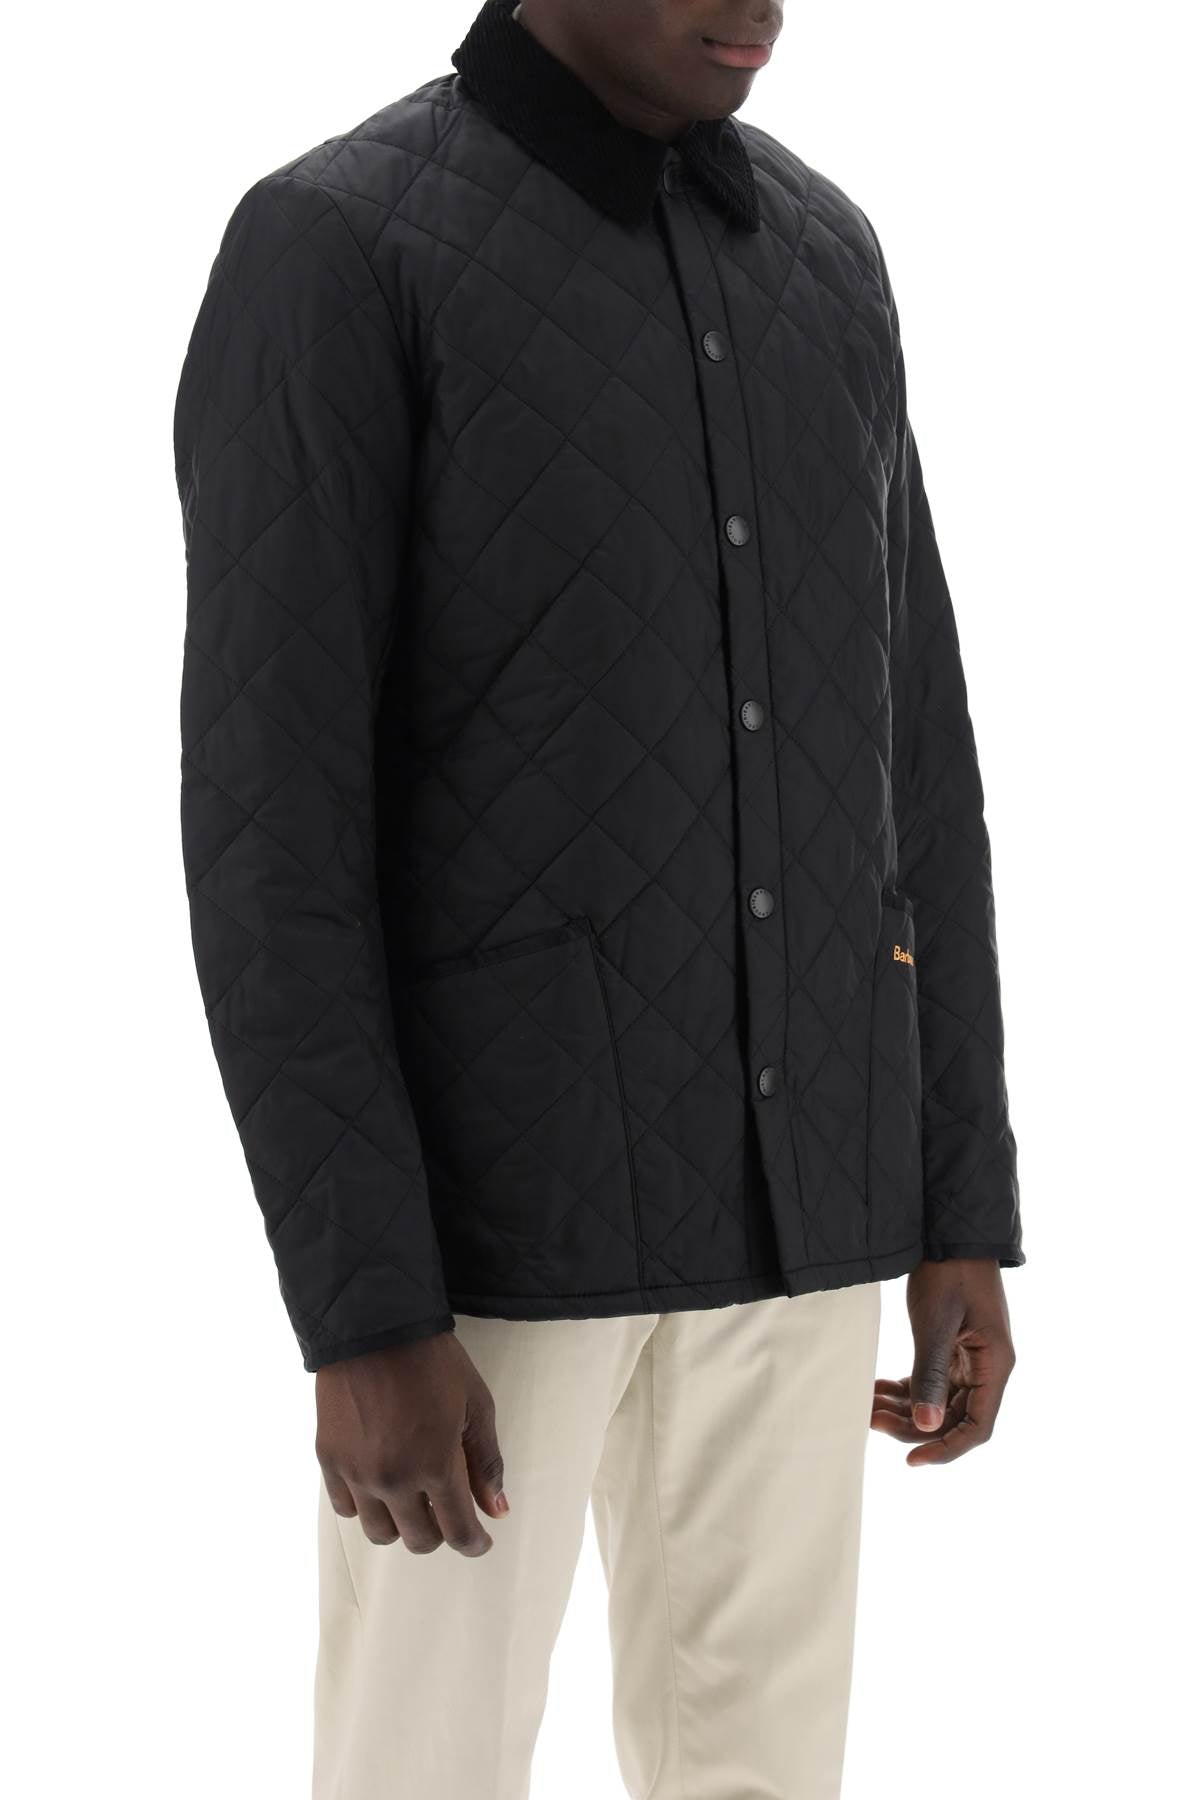 Barbour heritage liddesdale quilted jacket-1